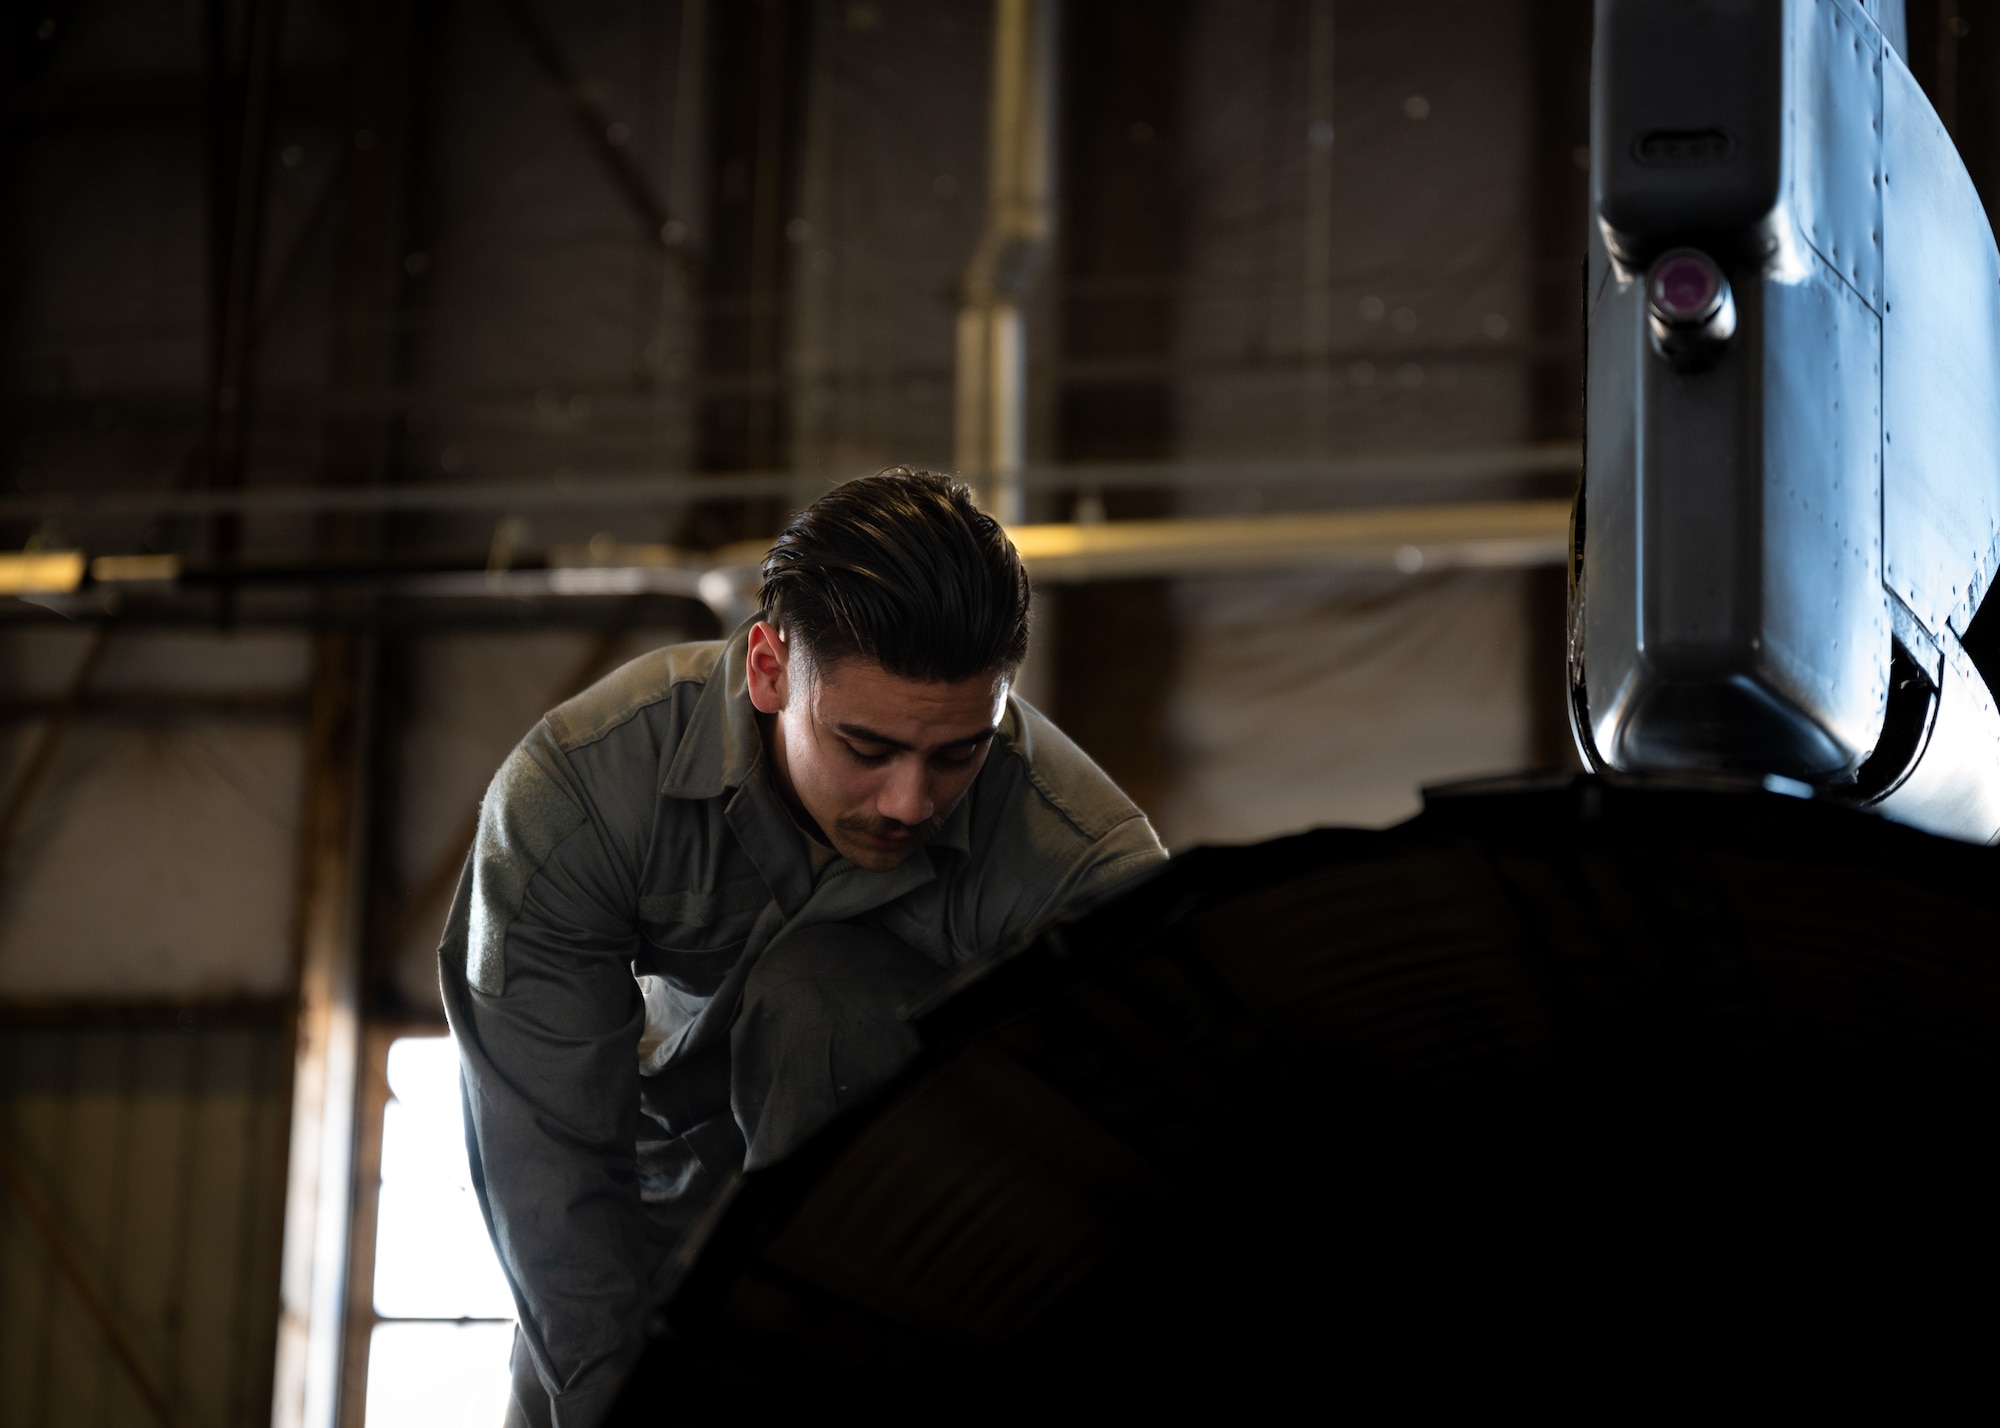 U.S. Air Force Senior Airman Ethan Estes, 55th Fighter Generation Squadron inspection section journeyman, performs routine maintenance on an F-16C Fighting Falcon that has just received 22 radar modification upgrades in conjunction with the Service Life Extension Program at Shaw Air Force Base, S.C., April 19, 2023. The APG-83 Scalable Agile Beam Radar allows the 20th FW to become a total lethal force by increasing the range of detection and weapons deployment to air-to-air and air-to-ground threats. (U.S. Air Force photo by Airman 1st Class Erin Stanley)